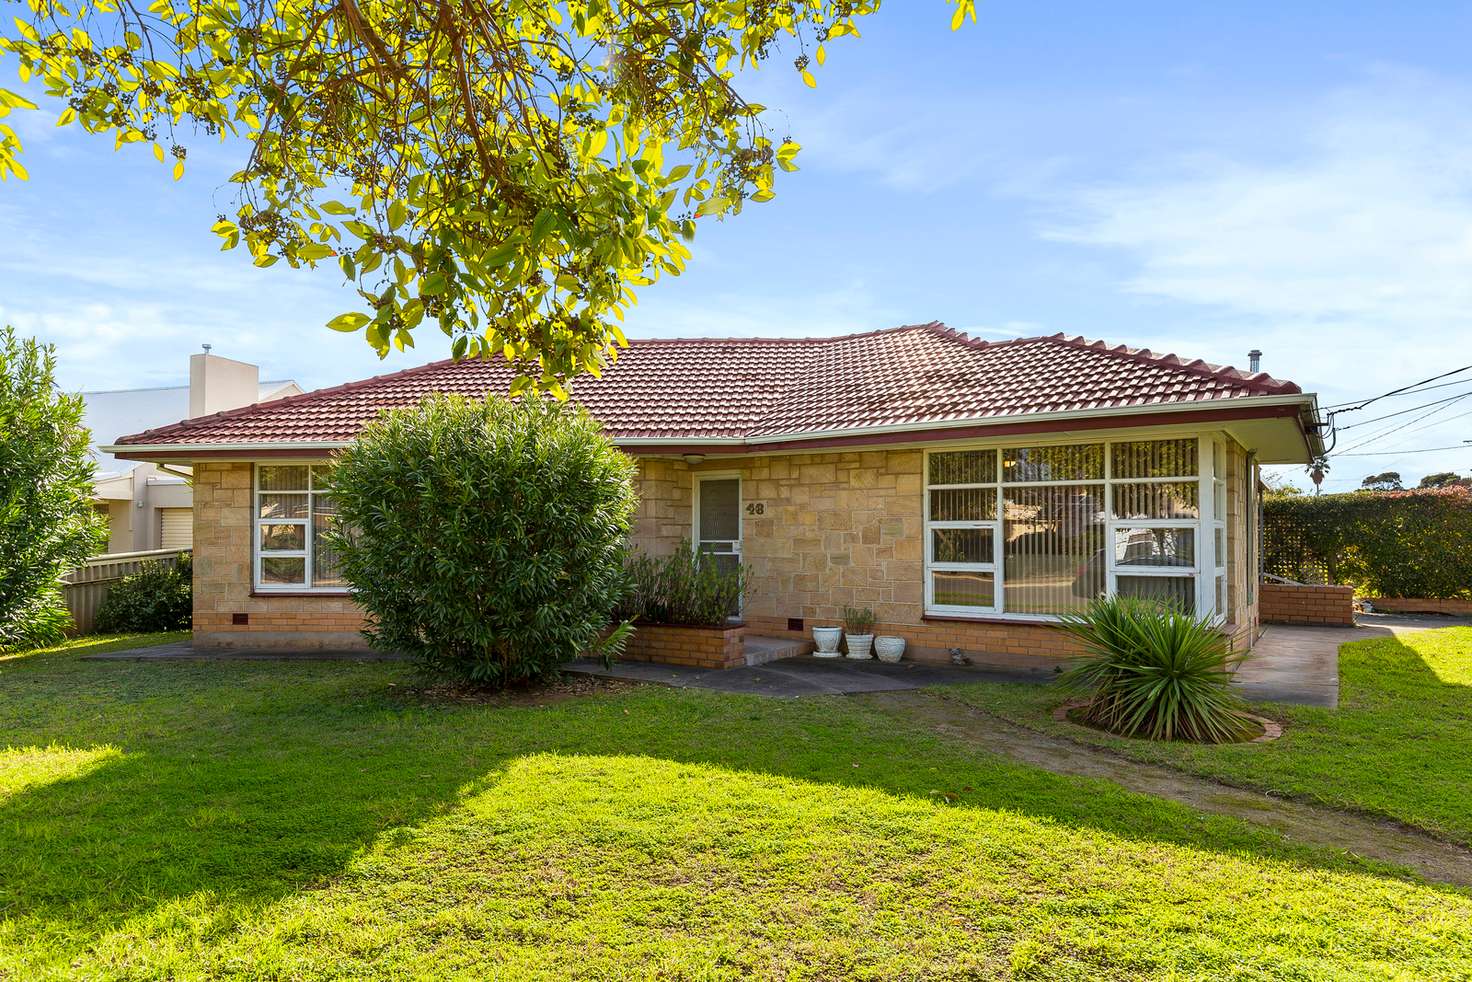 Main view of Homely house listing, 46 Somers Street, North Brighton SA 5048